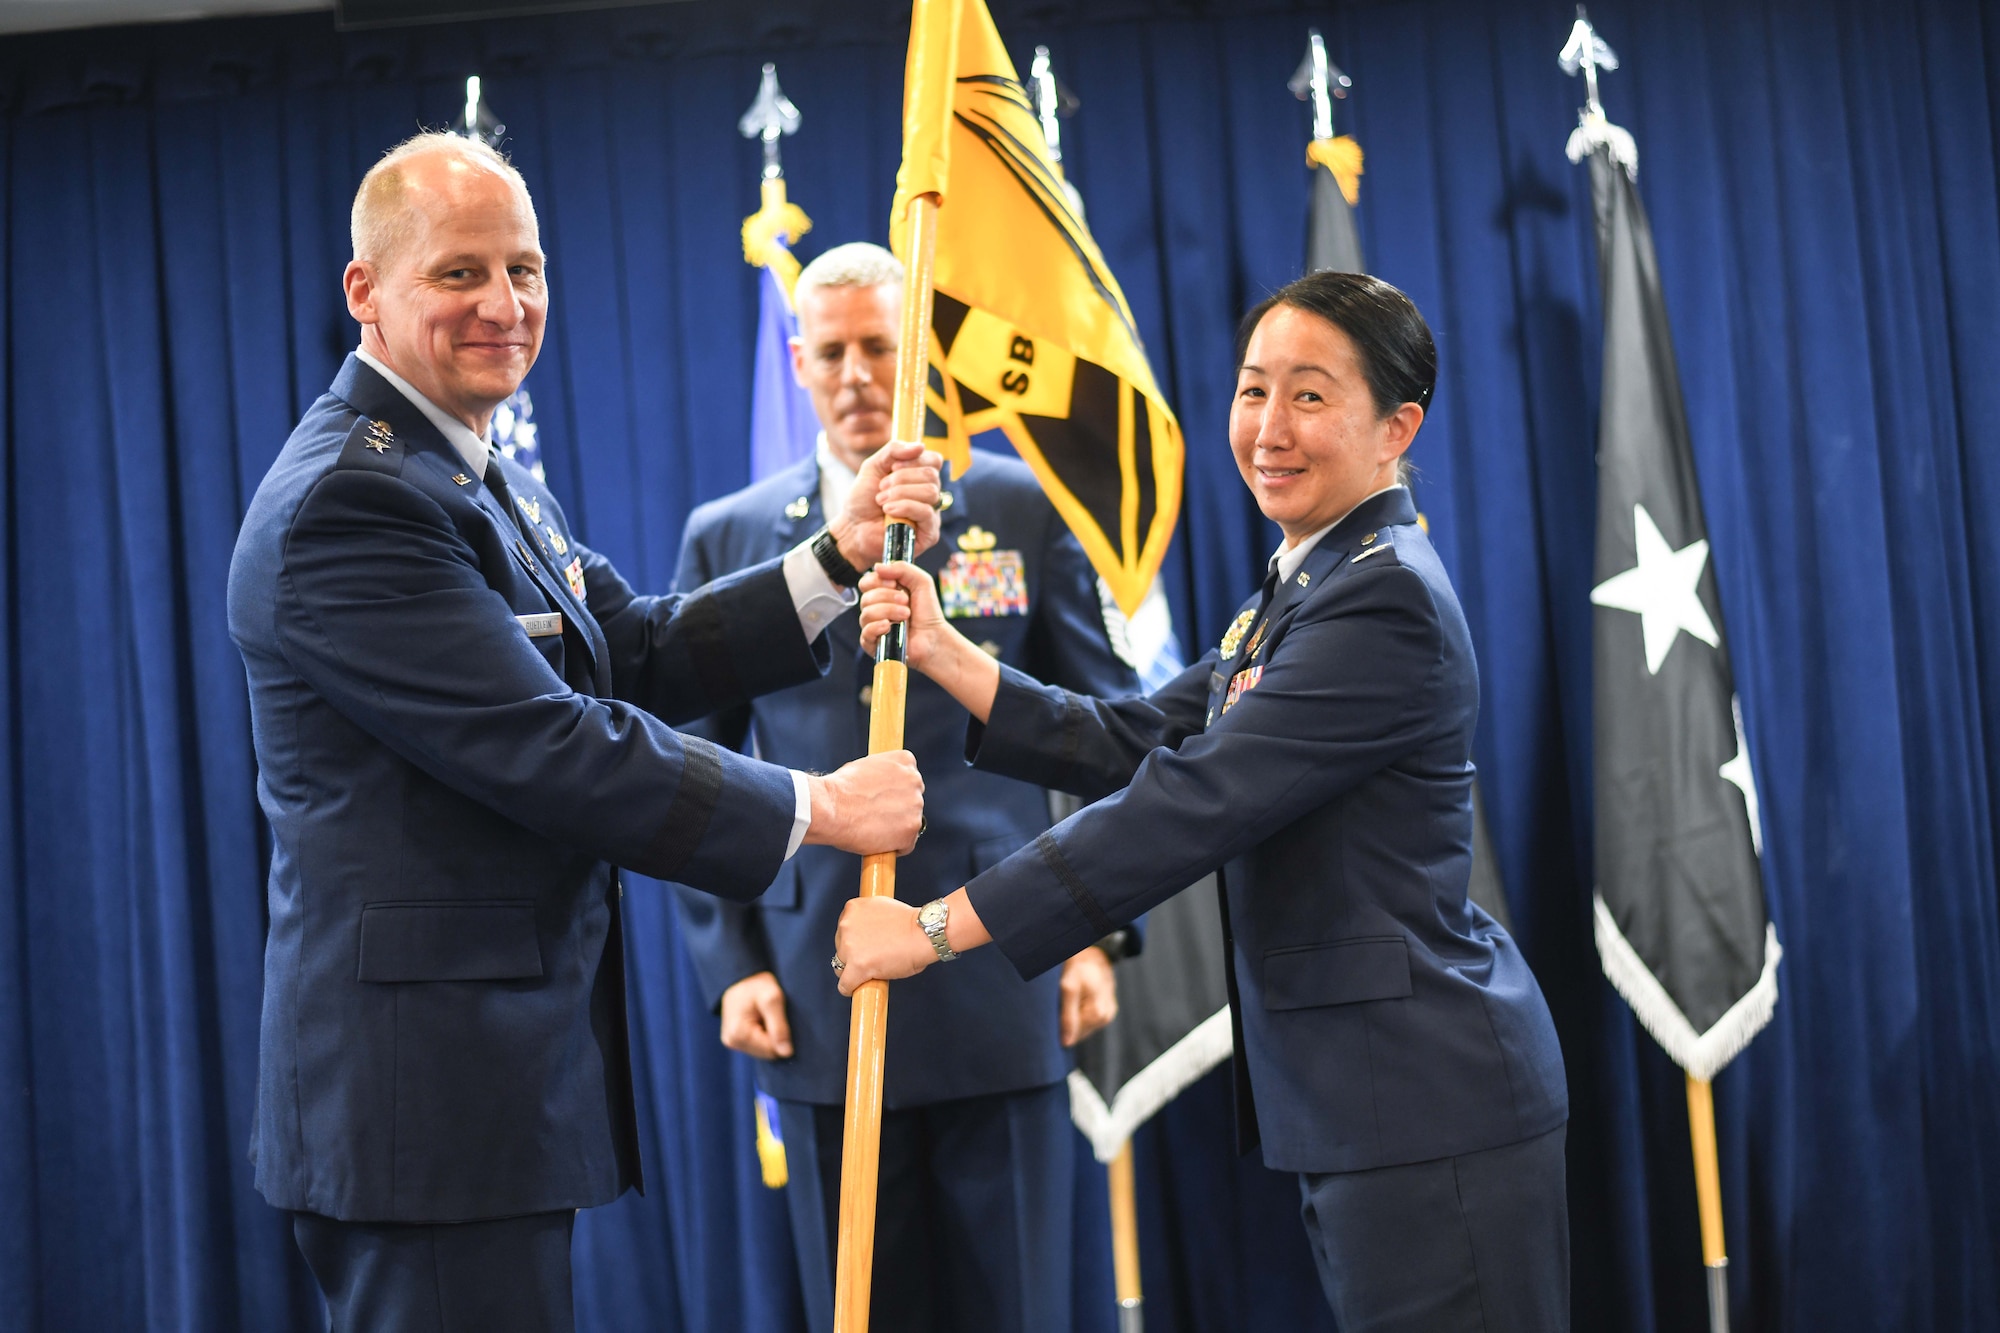 Col. Mia Walsh, commander, Space Base Delta 3, right, assumes command of SBD 3 from Lt. Gen. Michael Guetlein, commander, Space Systems Command, left, on July 14 at Los Angeles Air Force Base.  Chief Master Sgt. Michael Groder, acting Senior Enlisted Leader for SBD 3, assists with the change of command.